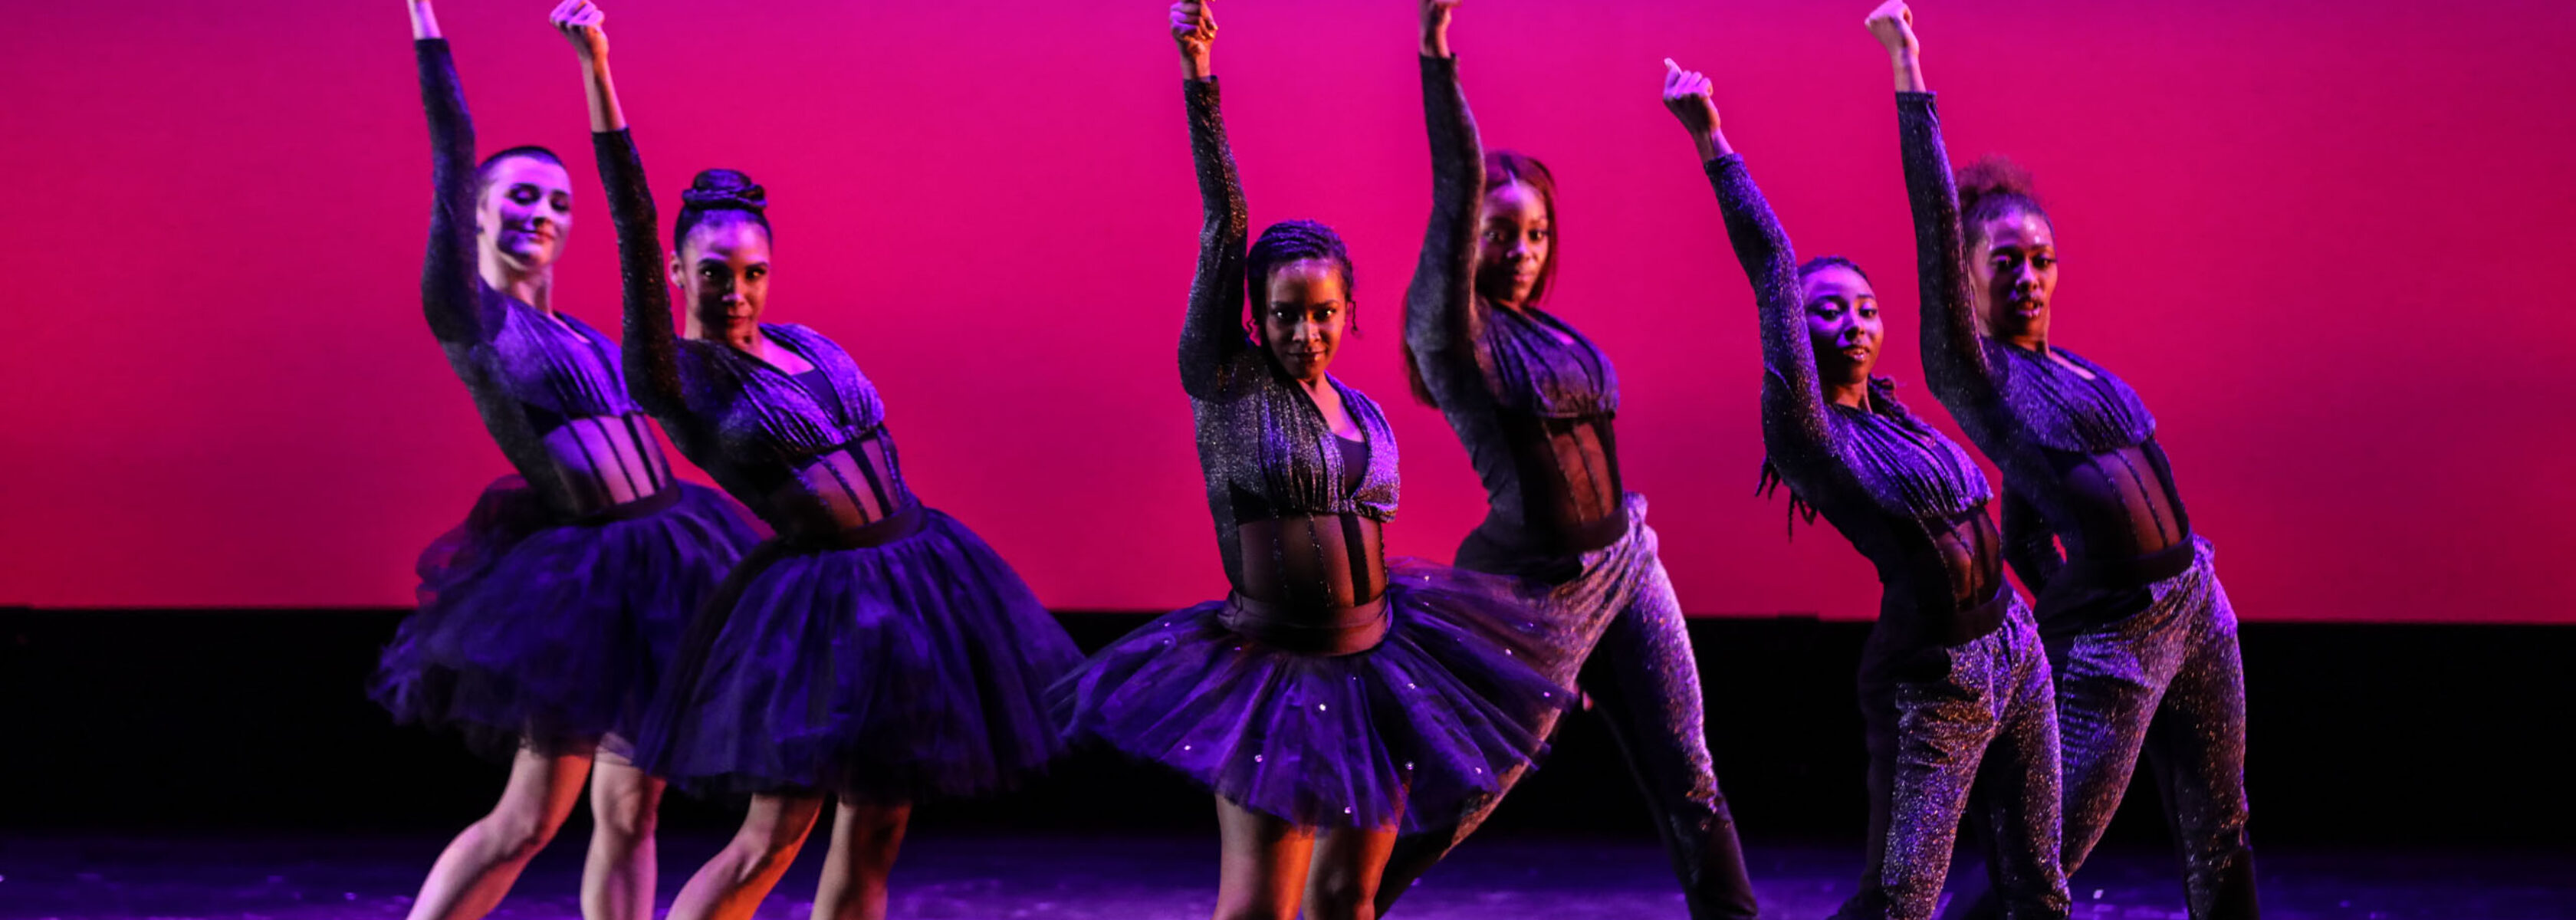 dancers posing on stage in front of a pink background.